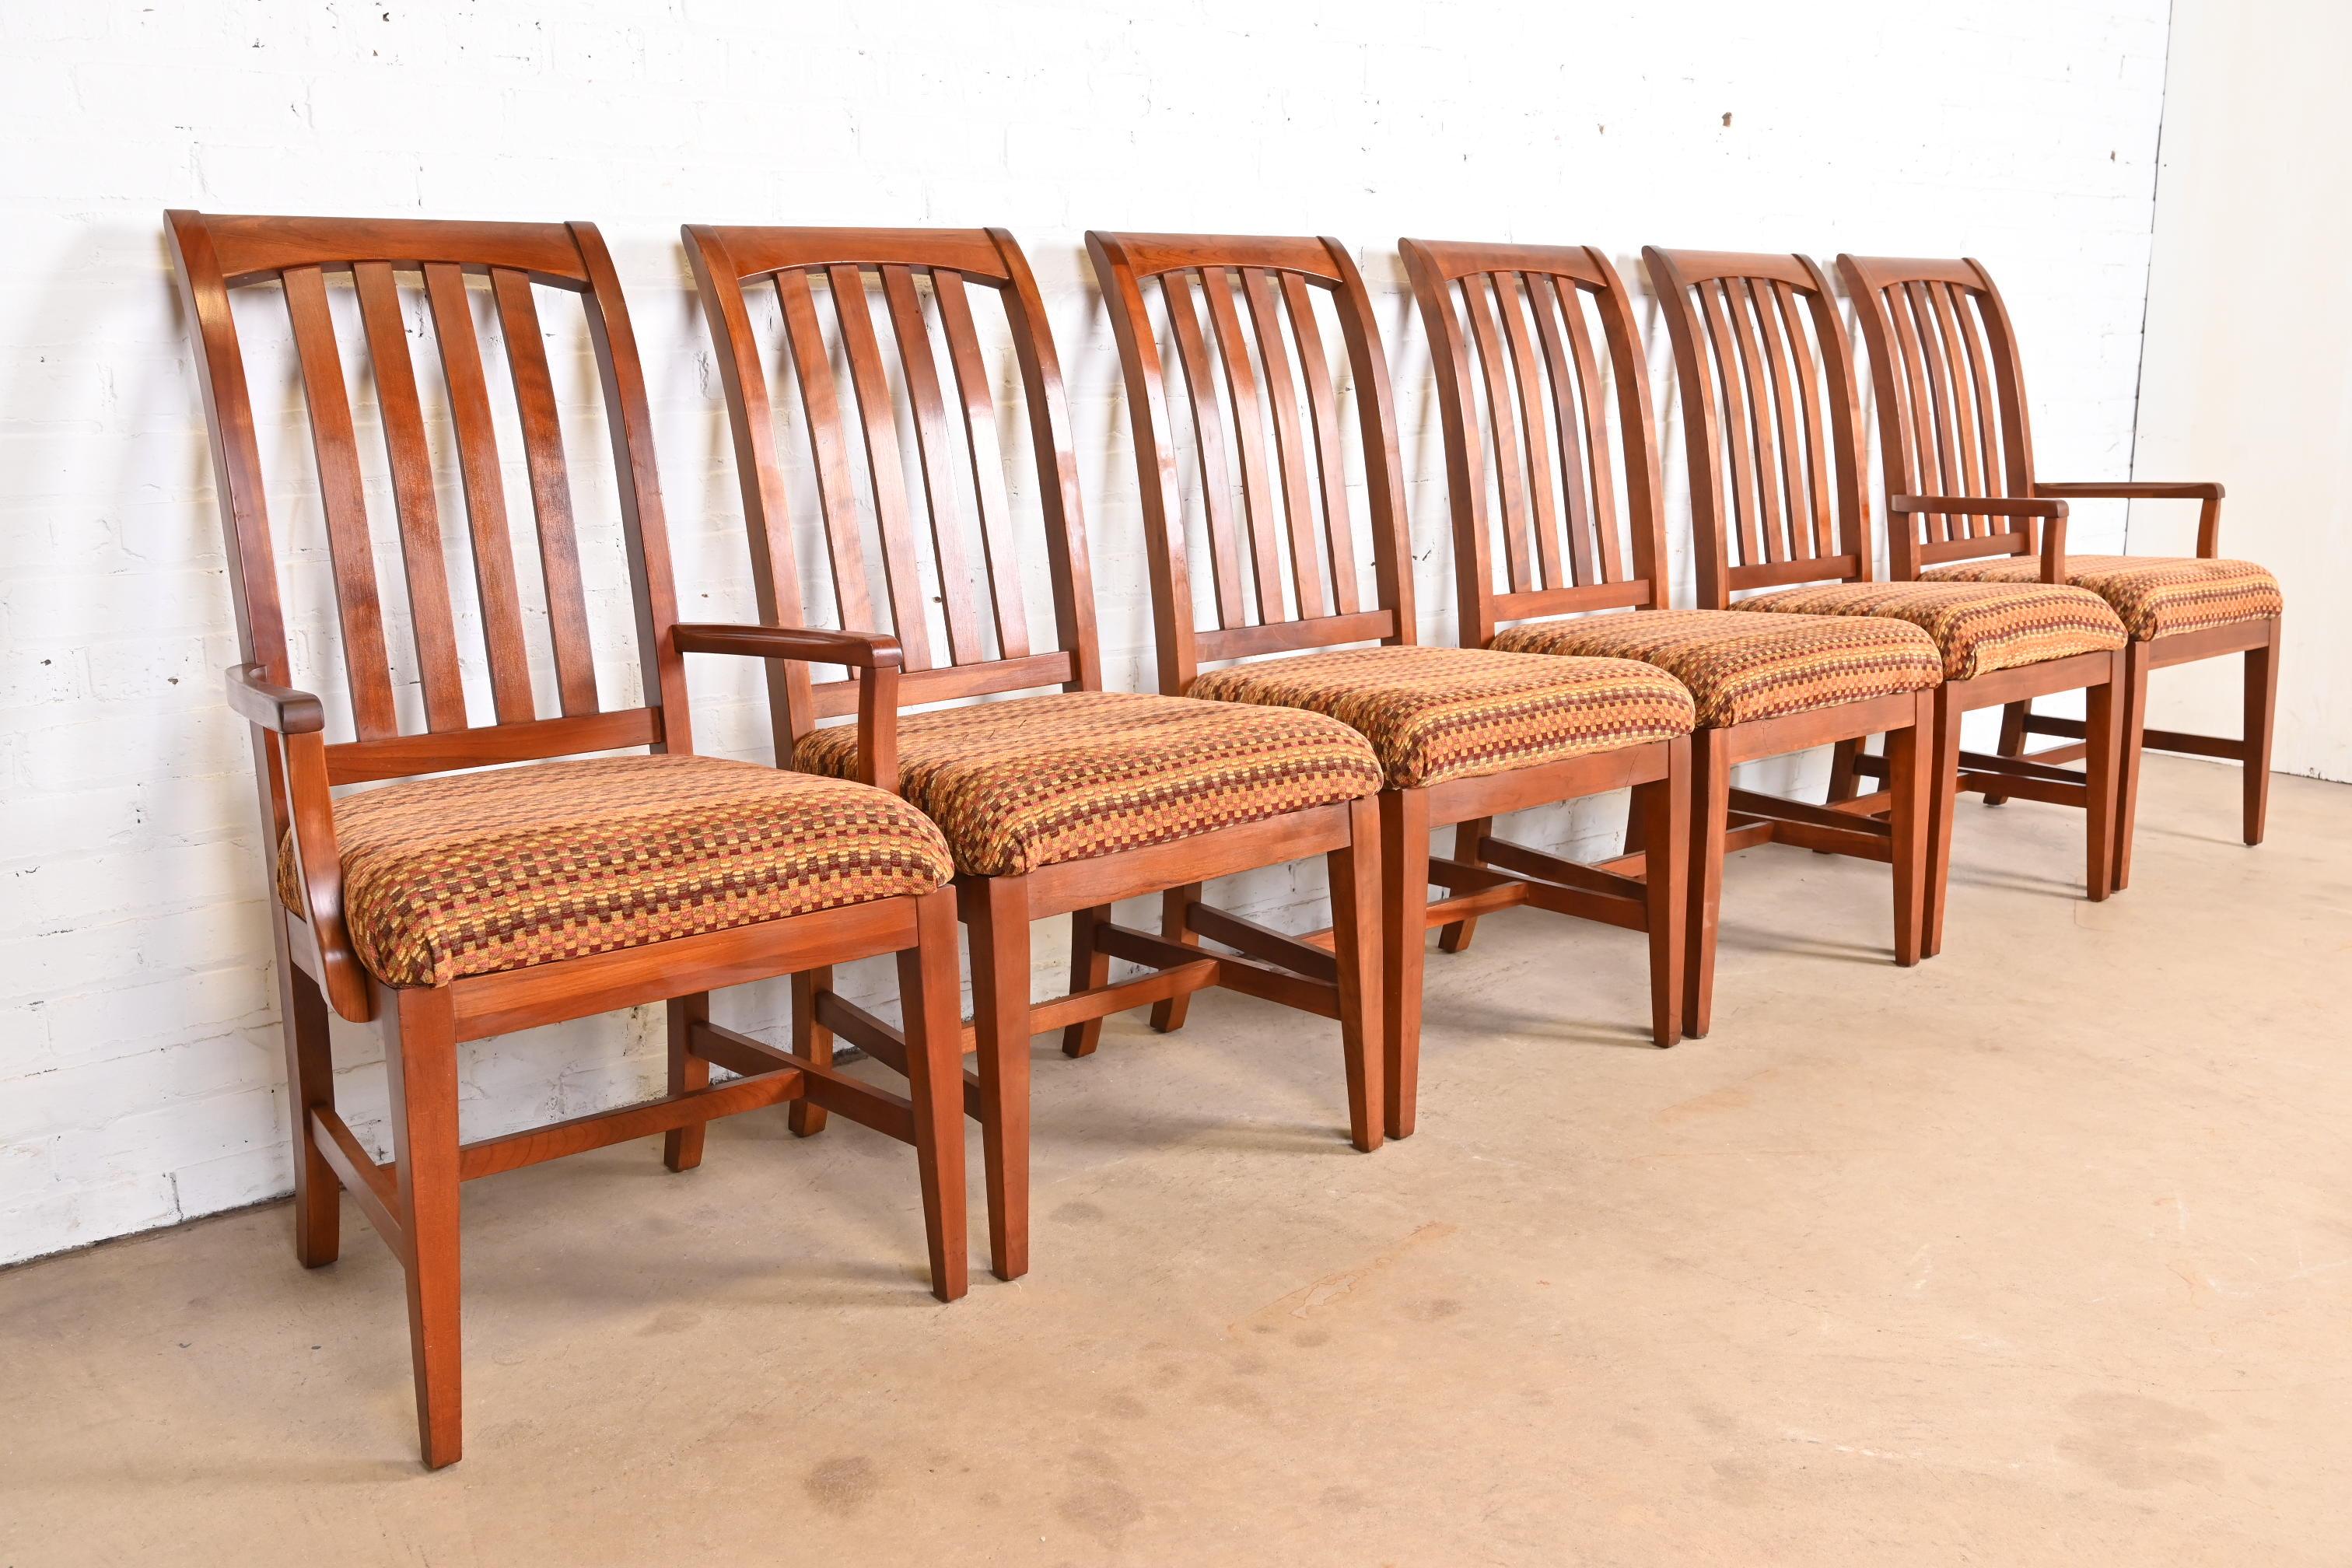 20th Century Arts & Crafts Solid Cherry Wood Dining Chairs, Set of Six For Sale